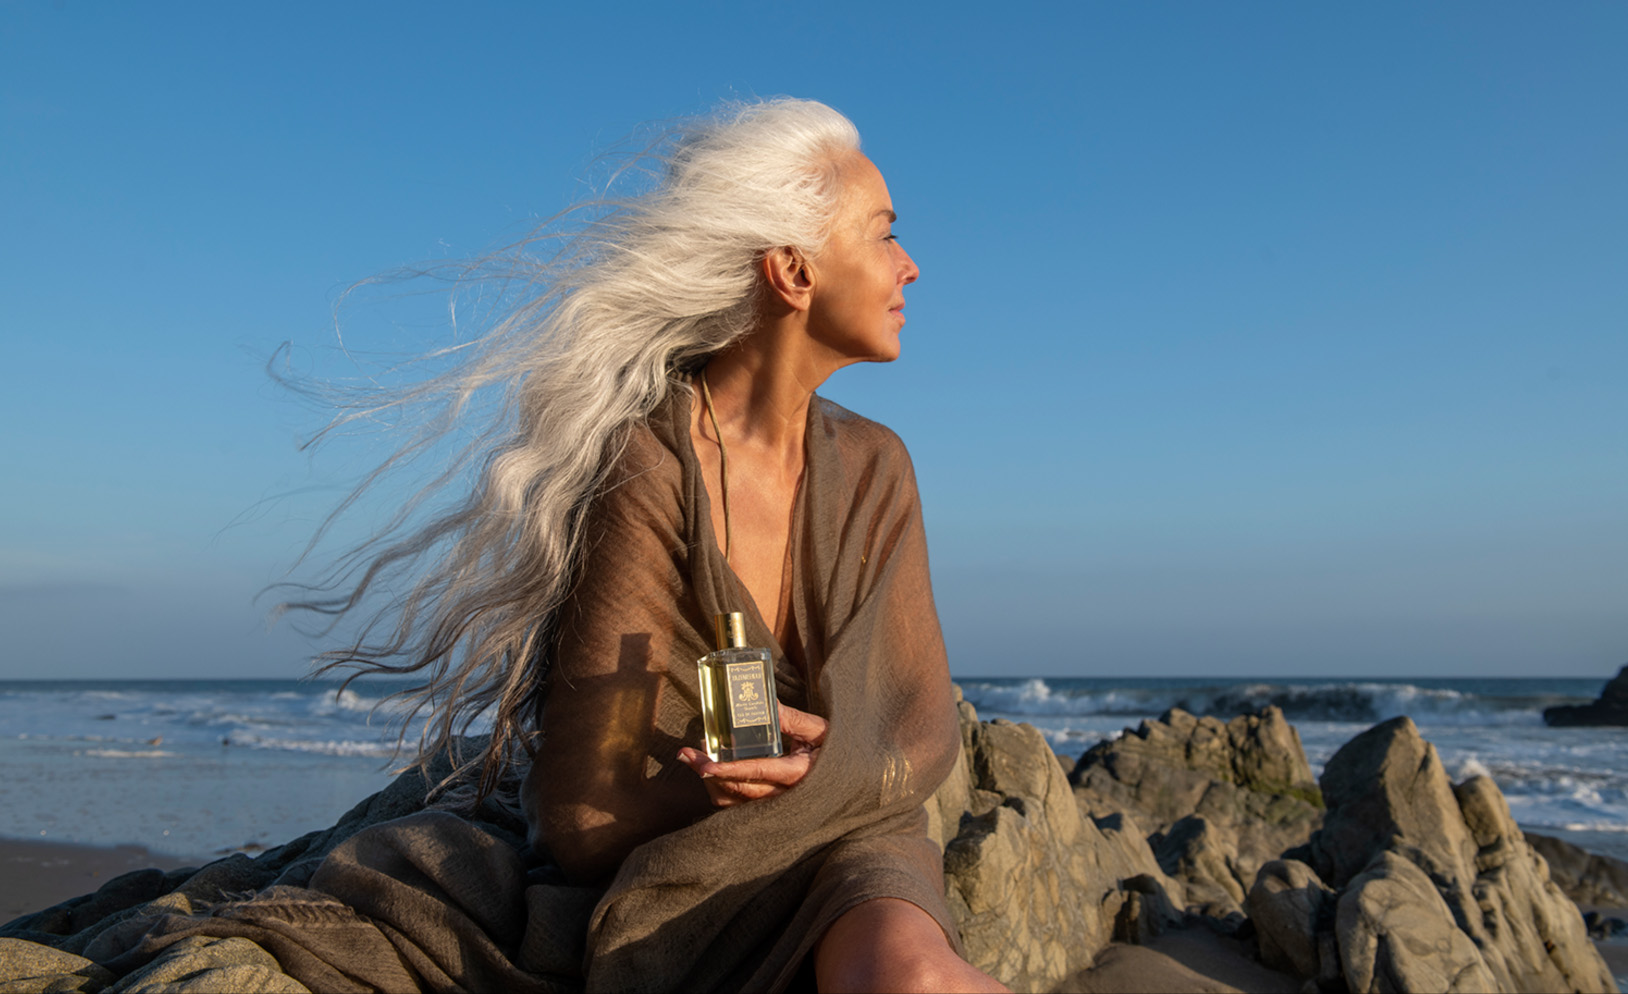 Image of Yazemeenah Rossi holding a bottle of her perfume sitting on rocks on the beach